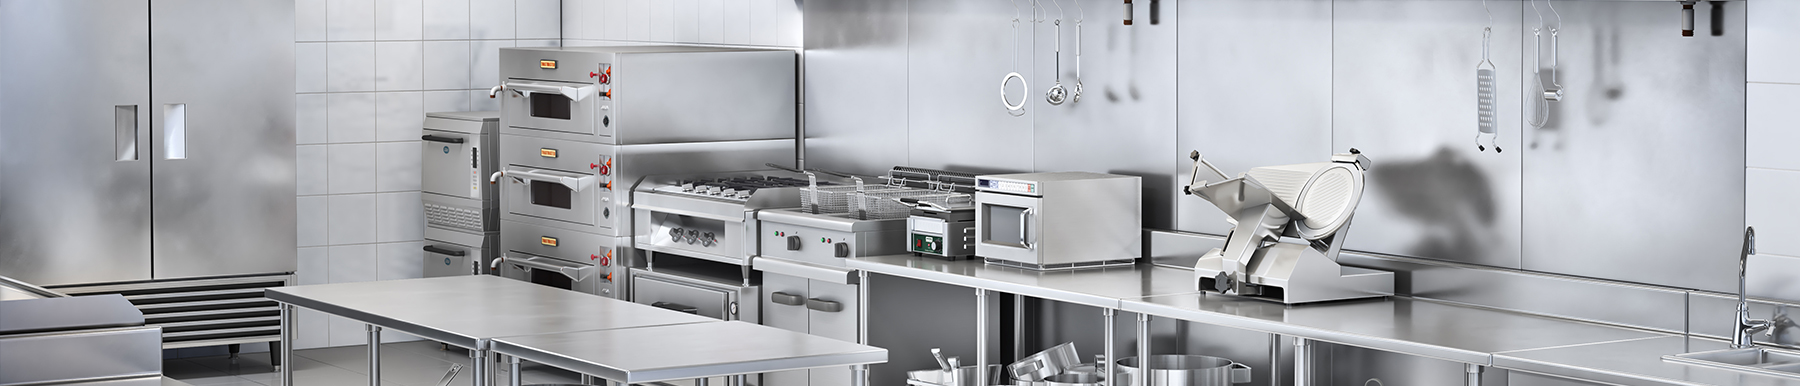 Catering Equipment Suppliers Near Bracknell Forest | H2 Catering Equipment Catering Equipment